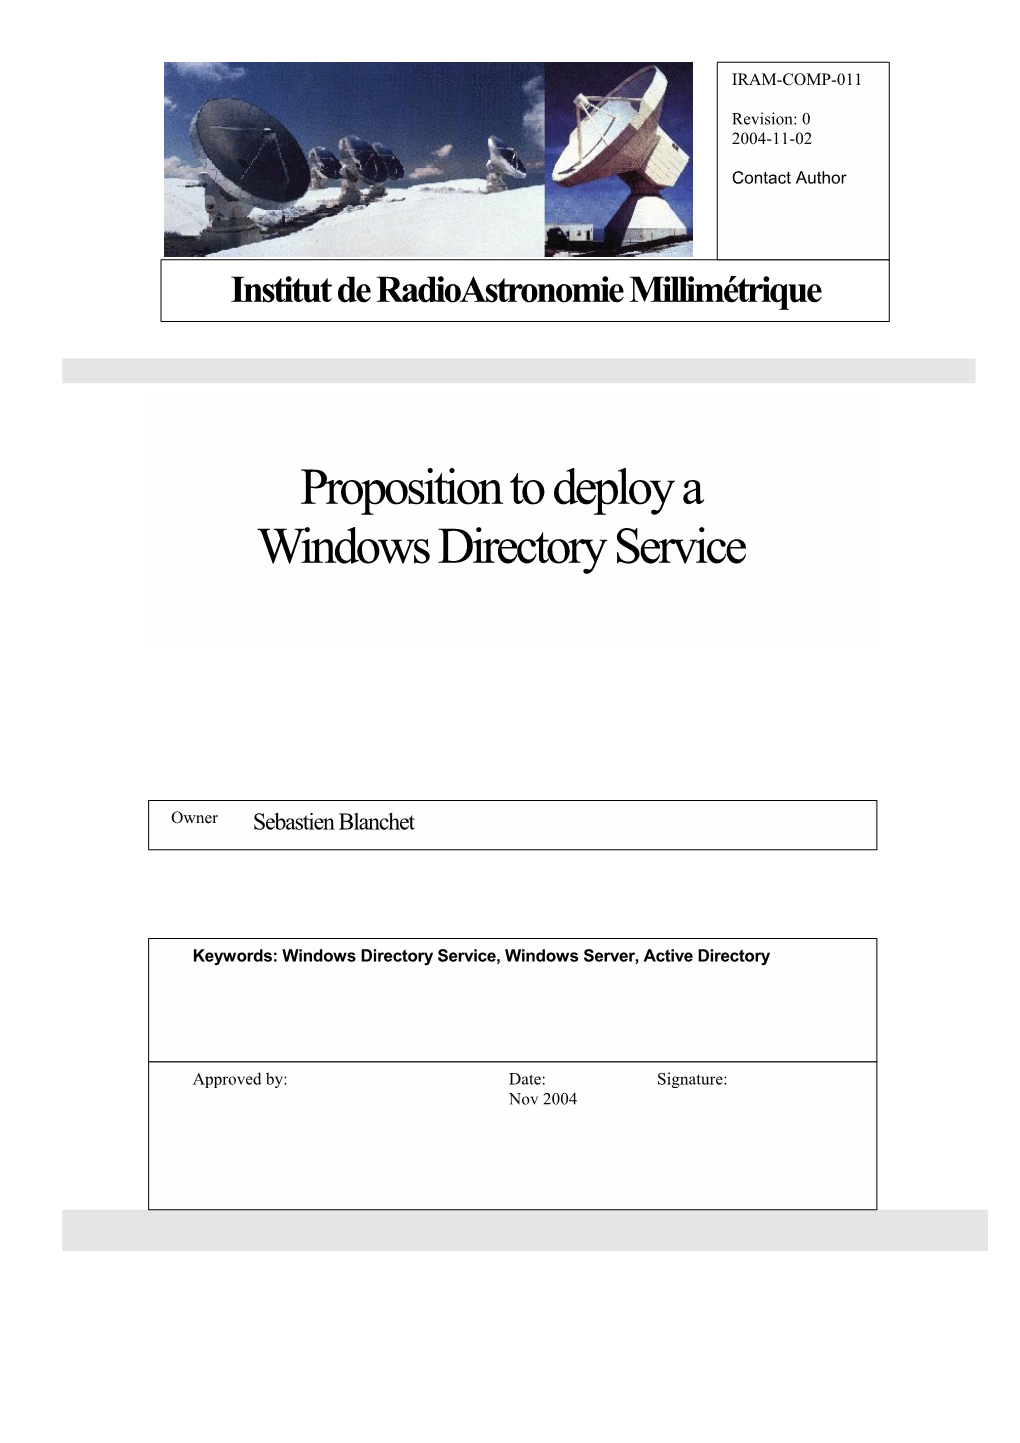 Proposition to Deploy a Windows Directory Service